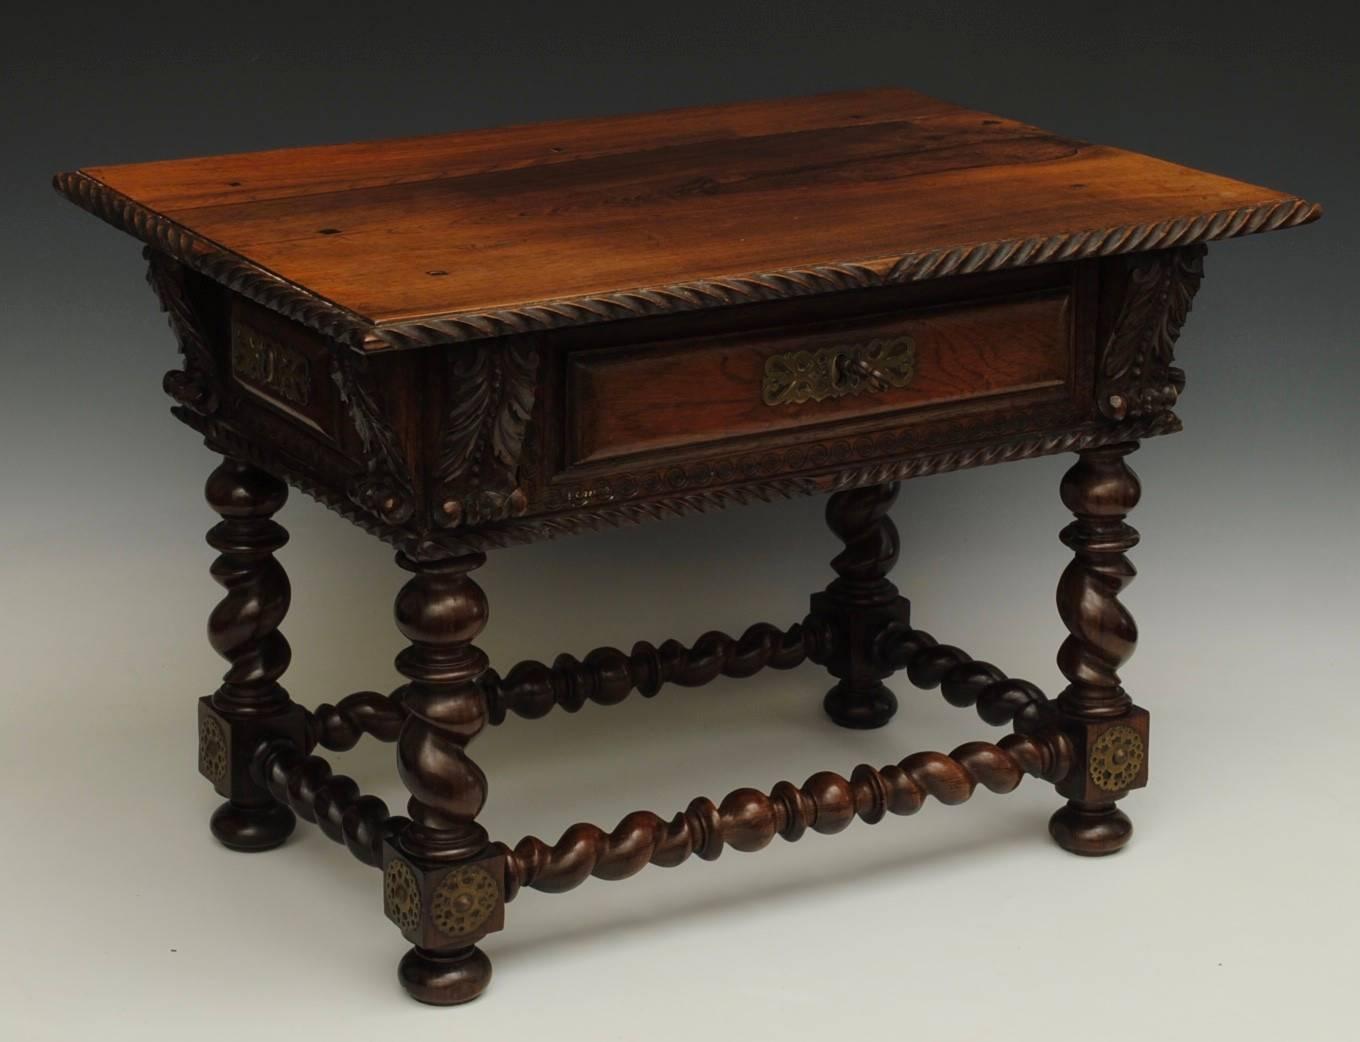 A charming and fine quality miniature rosewood table with well carved details and brass mounts, it even has the original key!